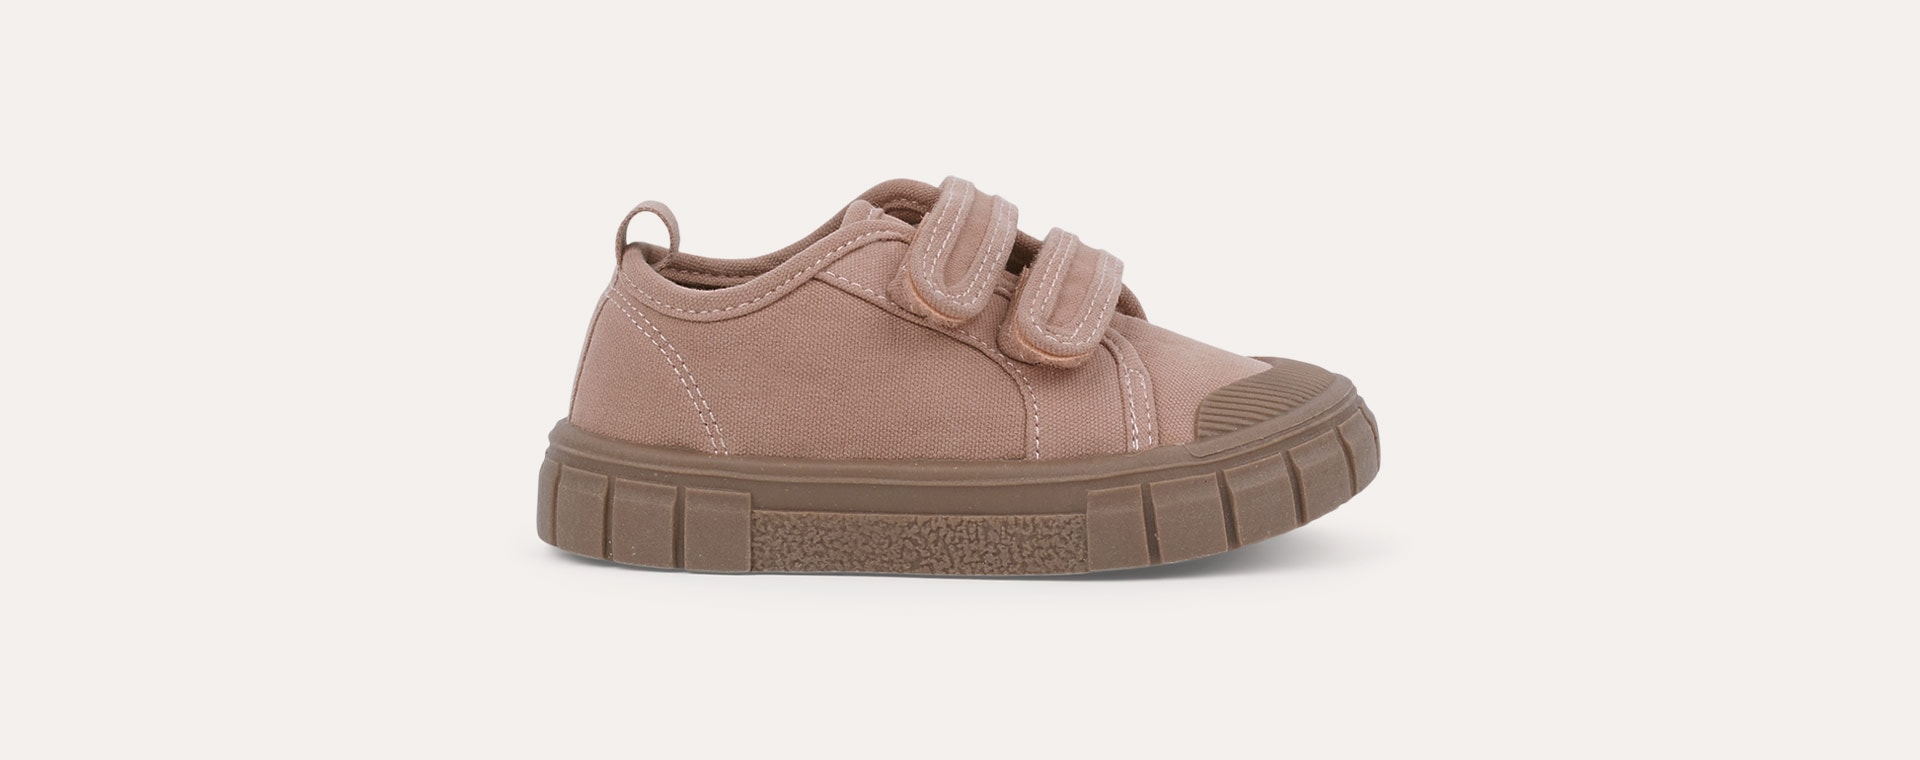 Clay KIDLY Label Canvas Trainers